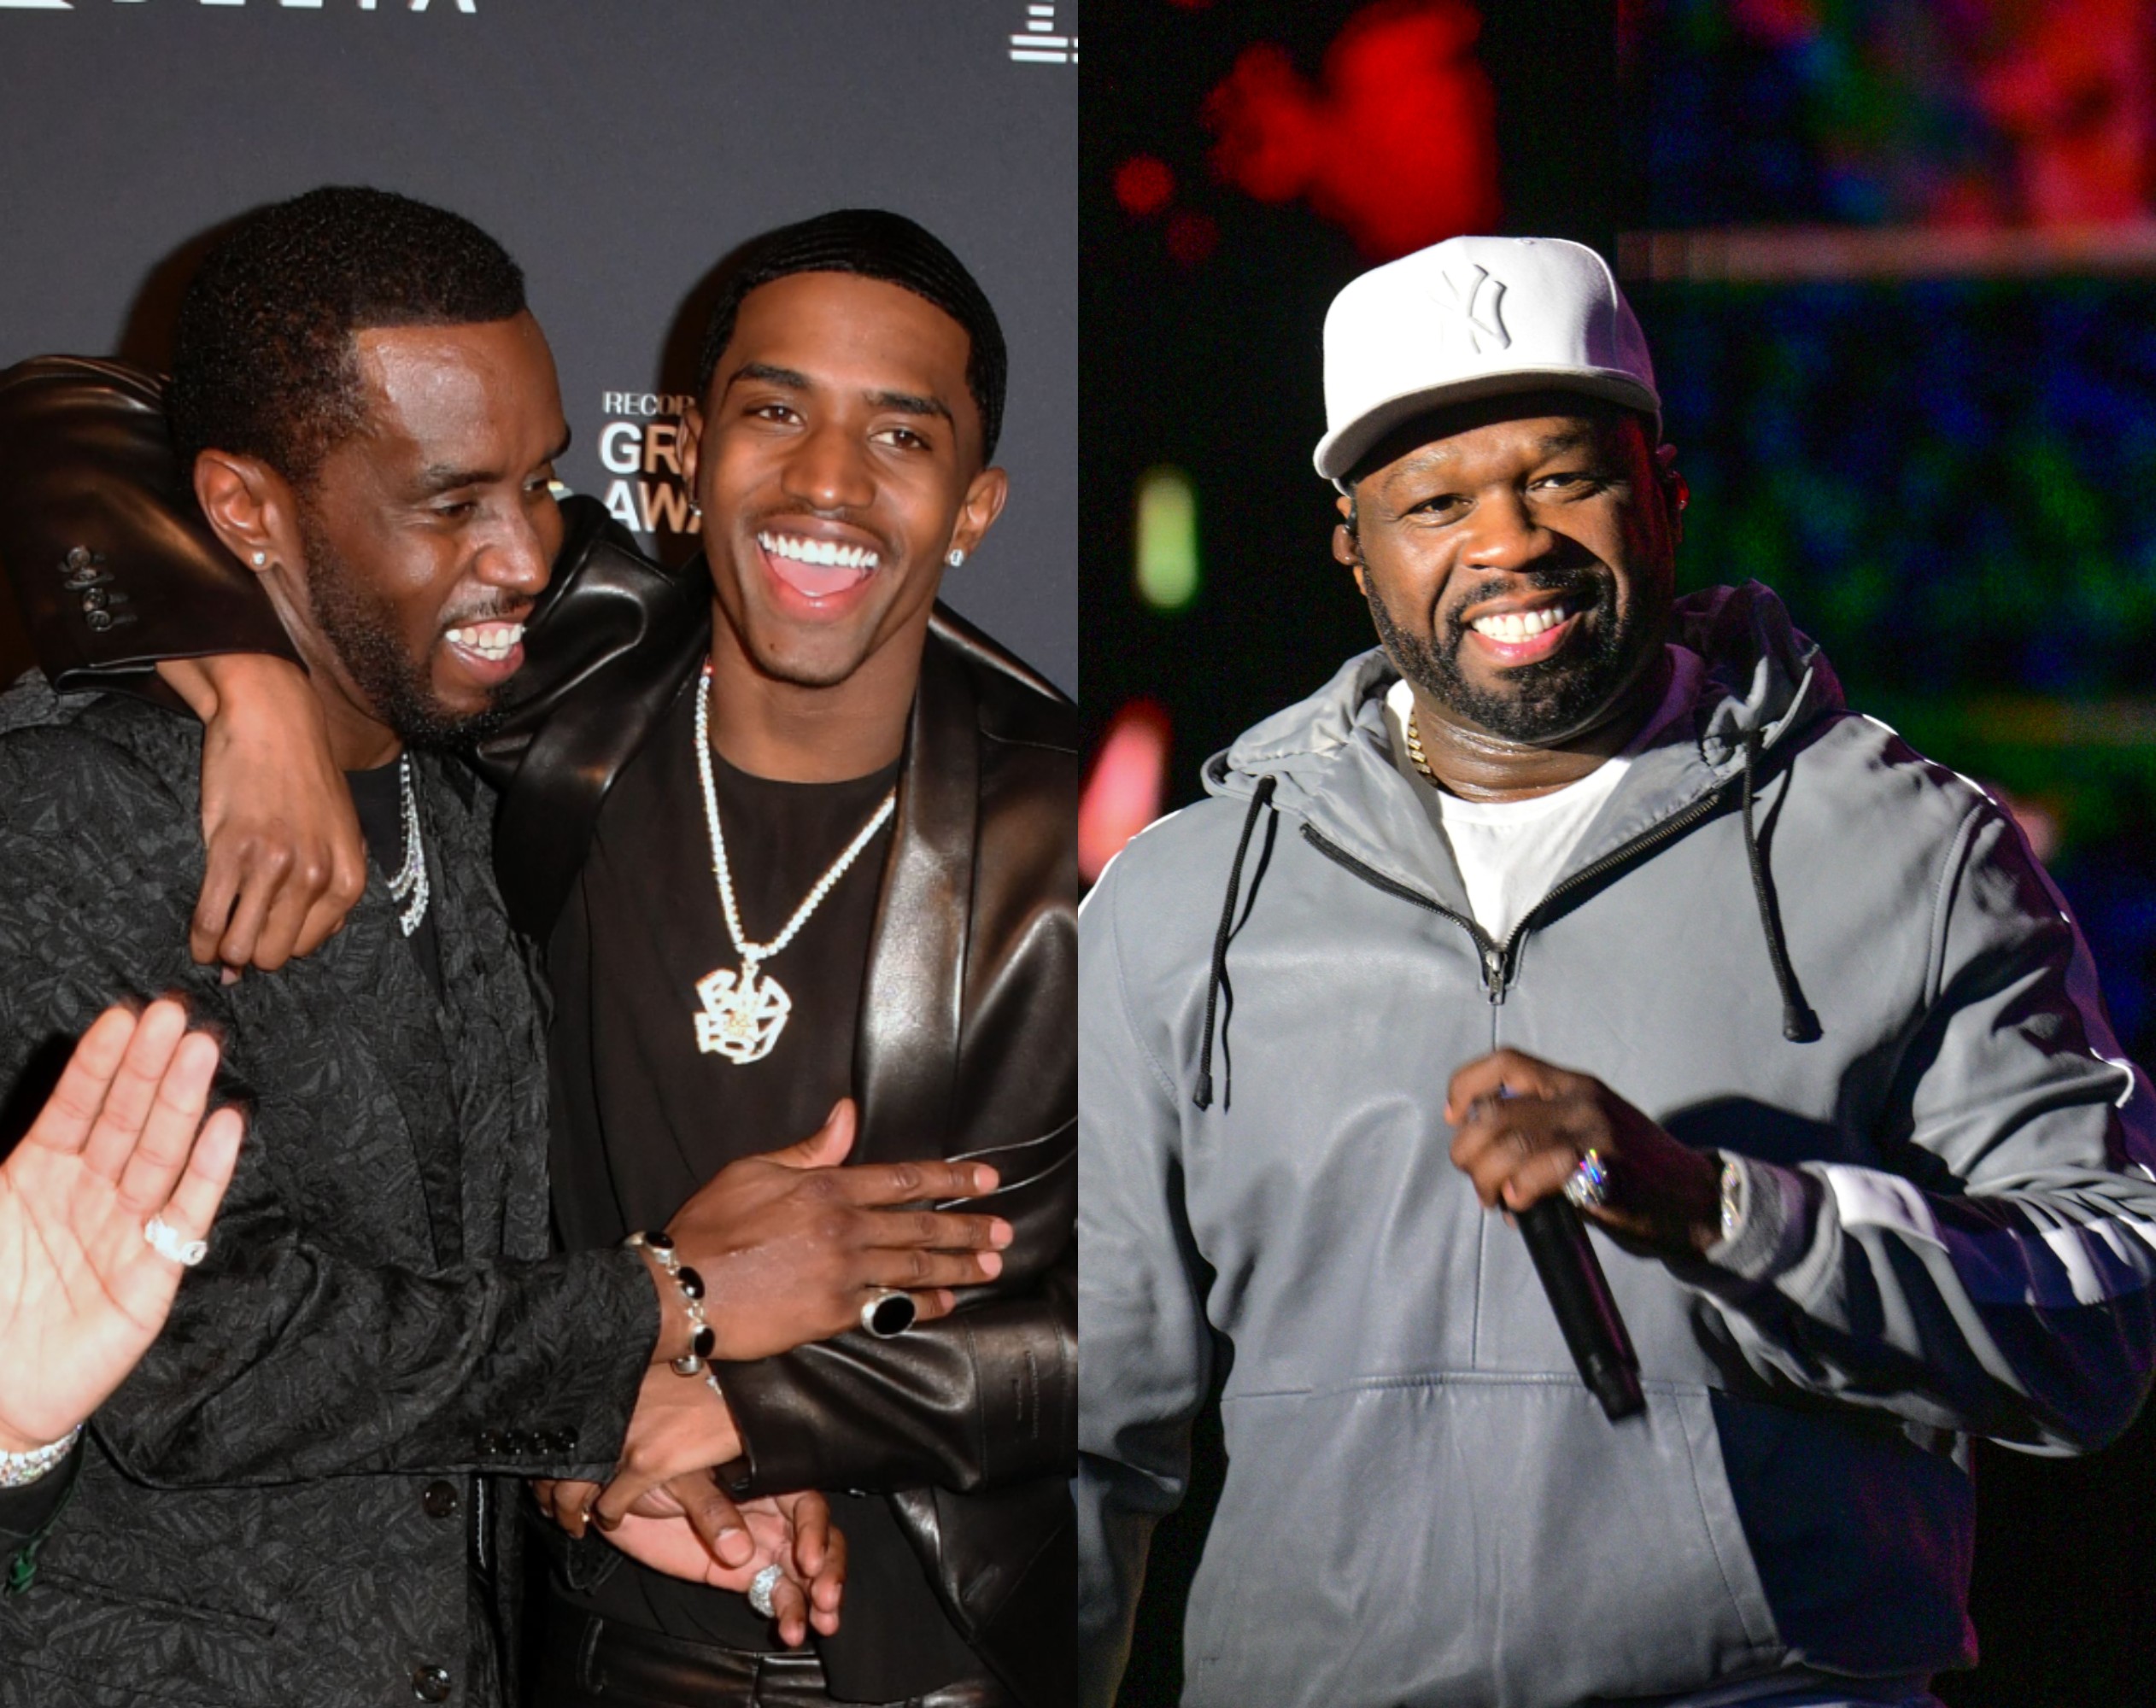 King Combs Tells 50 Cent ‘Suck My D**k’ On New Diss, 50 Drags Diddy’s Son For ‘Puffy Juice’ Assault Allegations